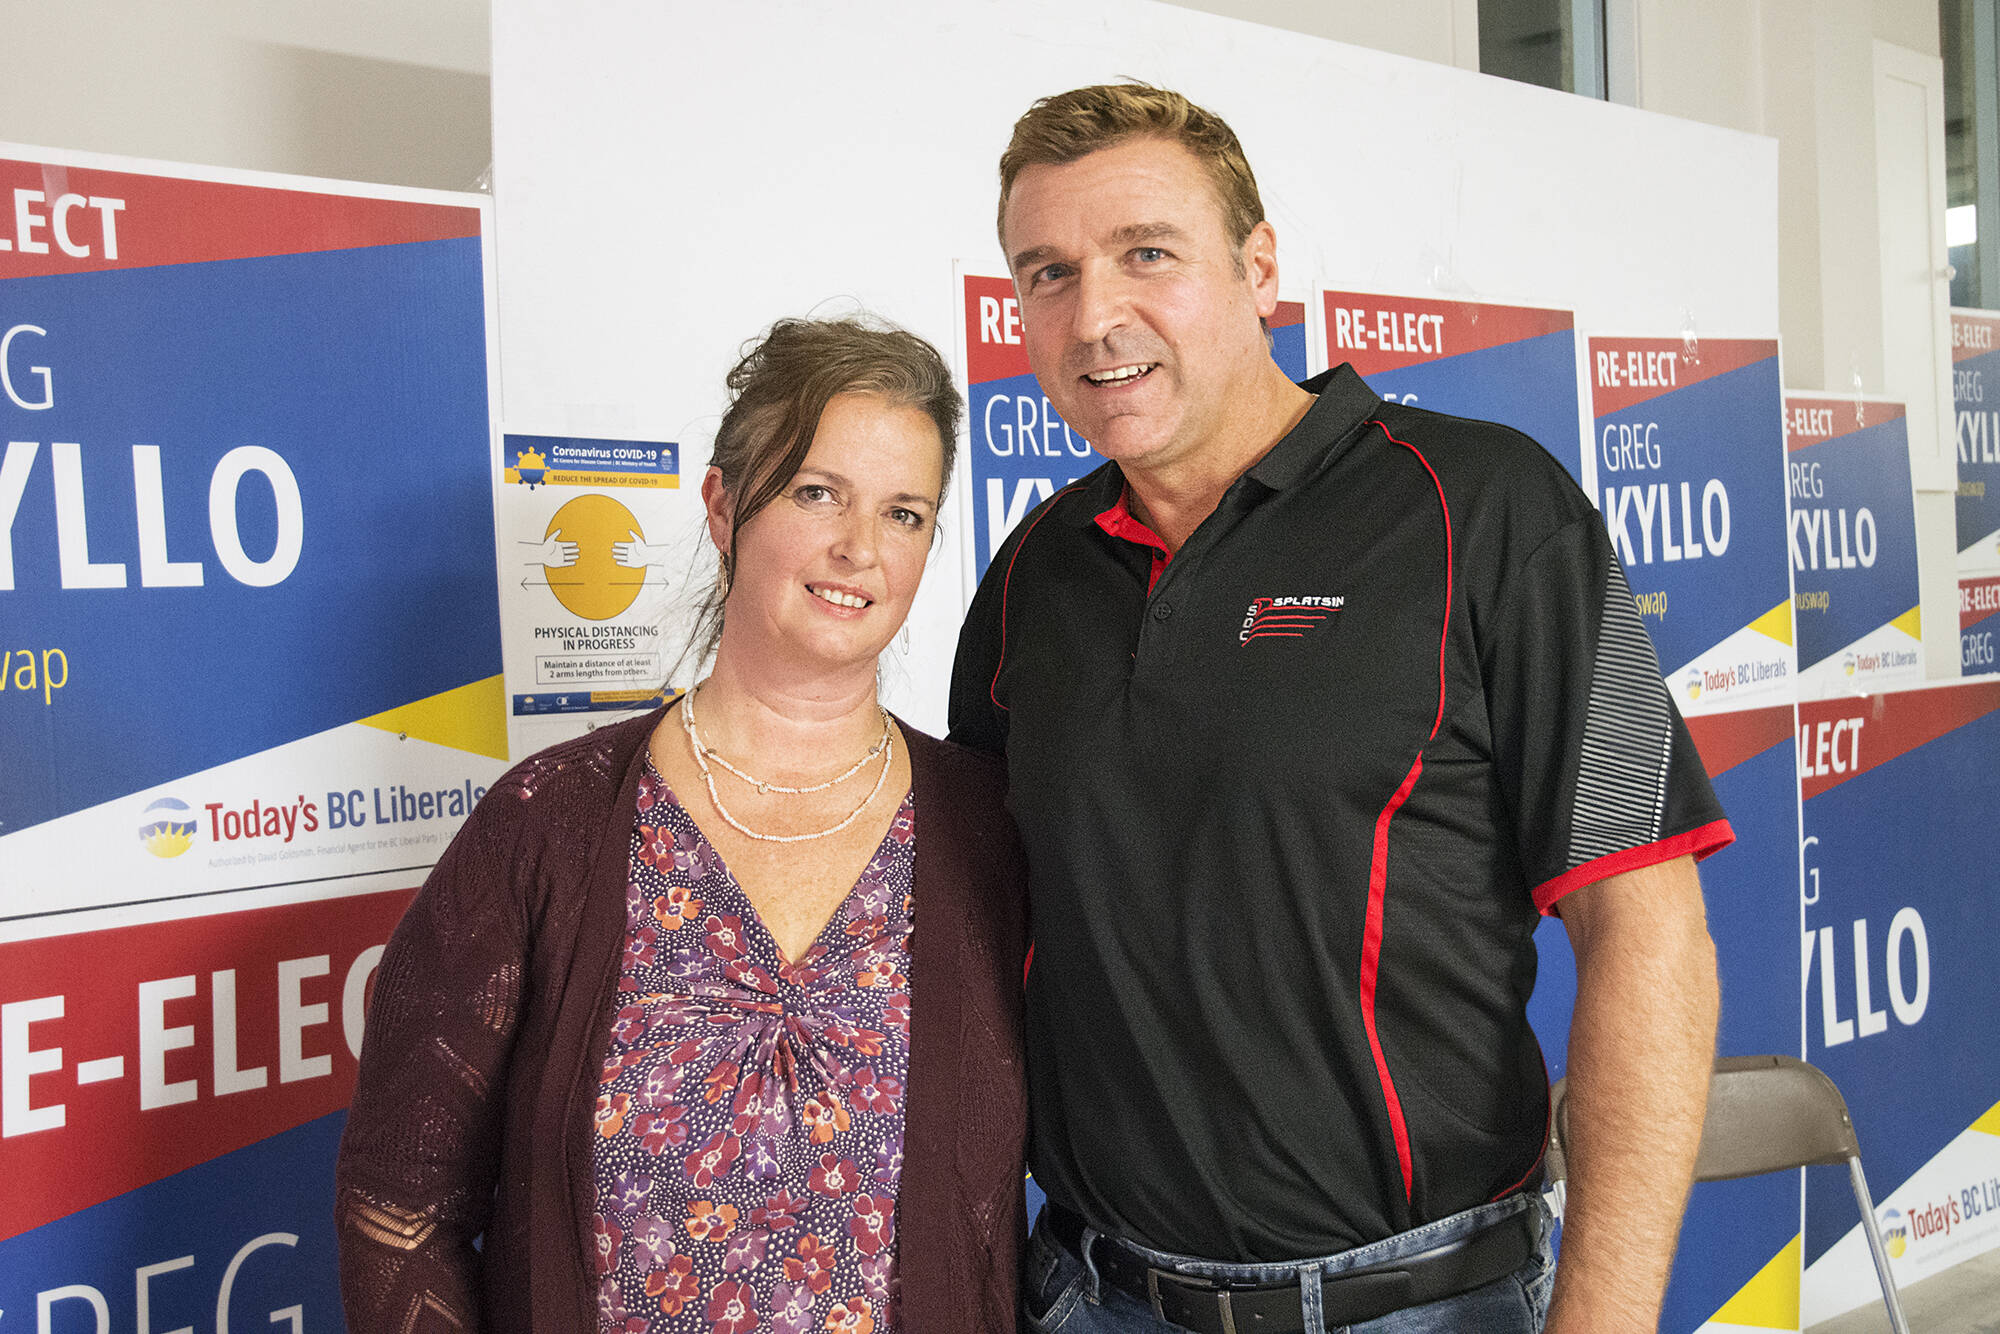 Greg Kyllo and wife Georgina celebrate another successful campaign, with Greg winnning a third term as the Shuswap’s MLA in the 42nd provincial general election in 2020. (File photo)